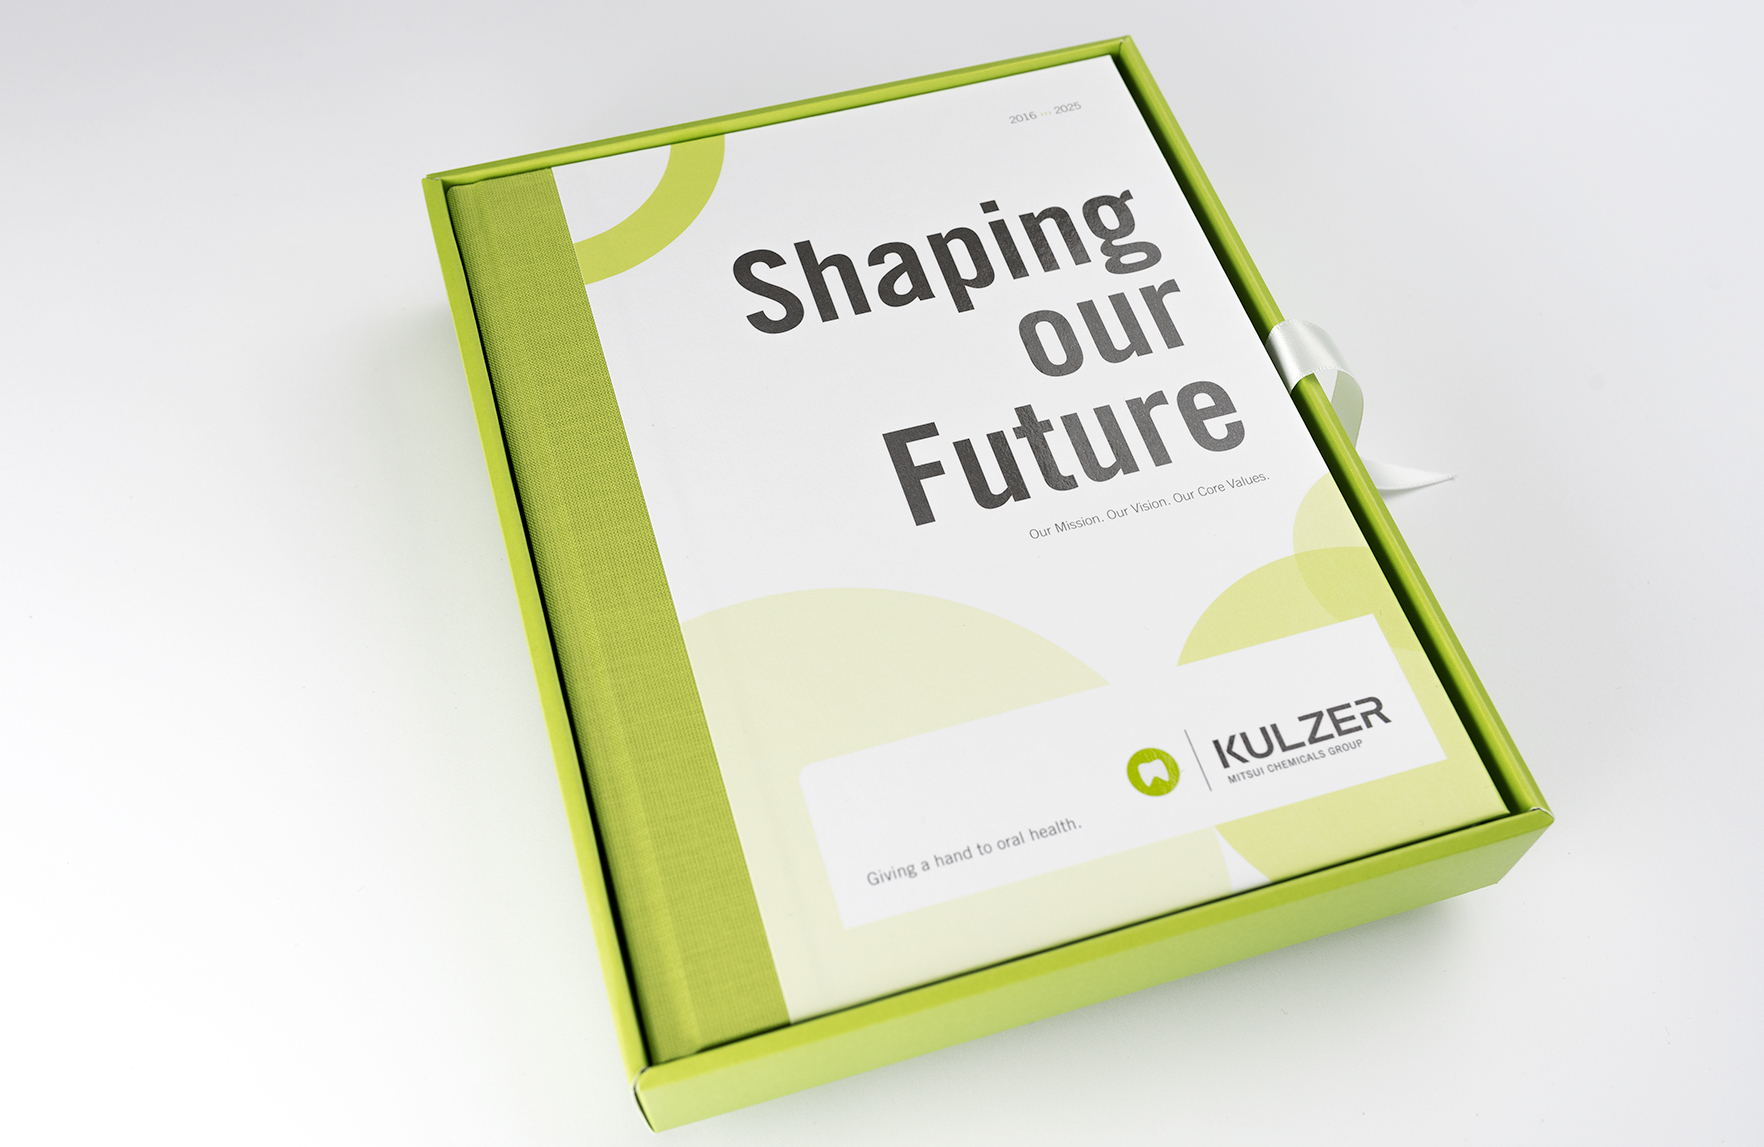 Shaping the Future. KULZER MITSUI CHEMICALS GROUP